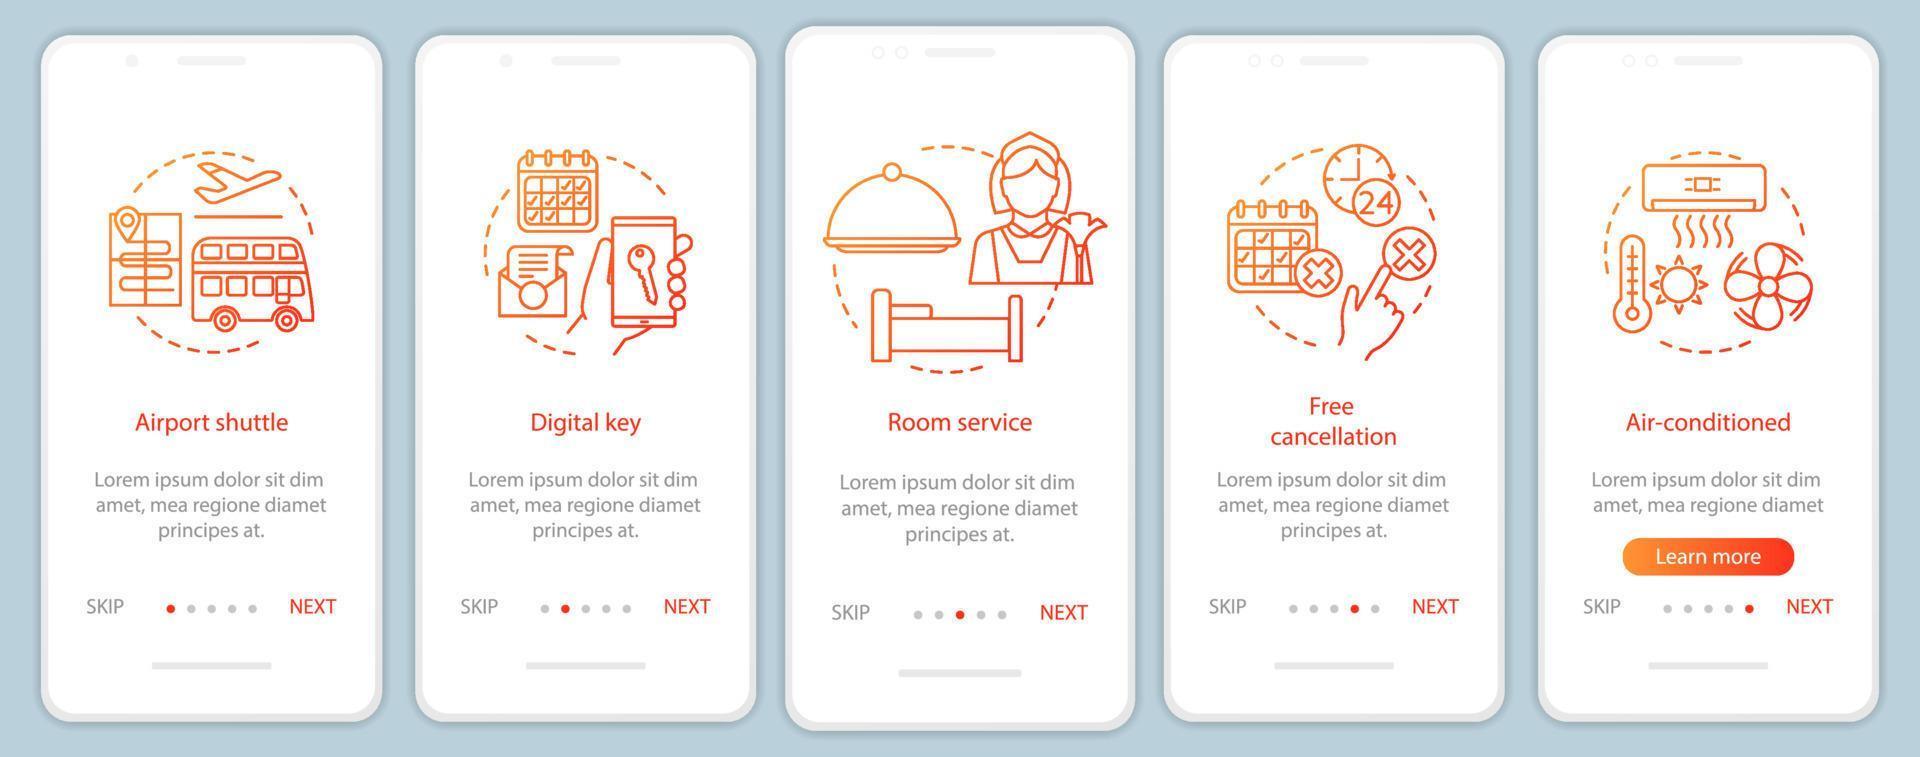 Hotel services onboarding mobile app page screen with linear concepts. Airport shuttle, free cancellation walkthrough steps graphic instructions. UX, UI, GUI vector template with illustrations